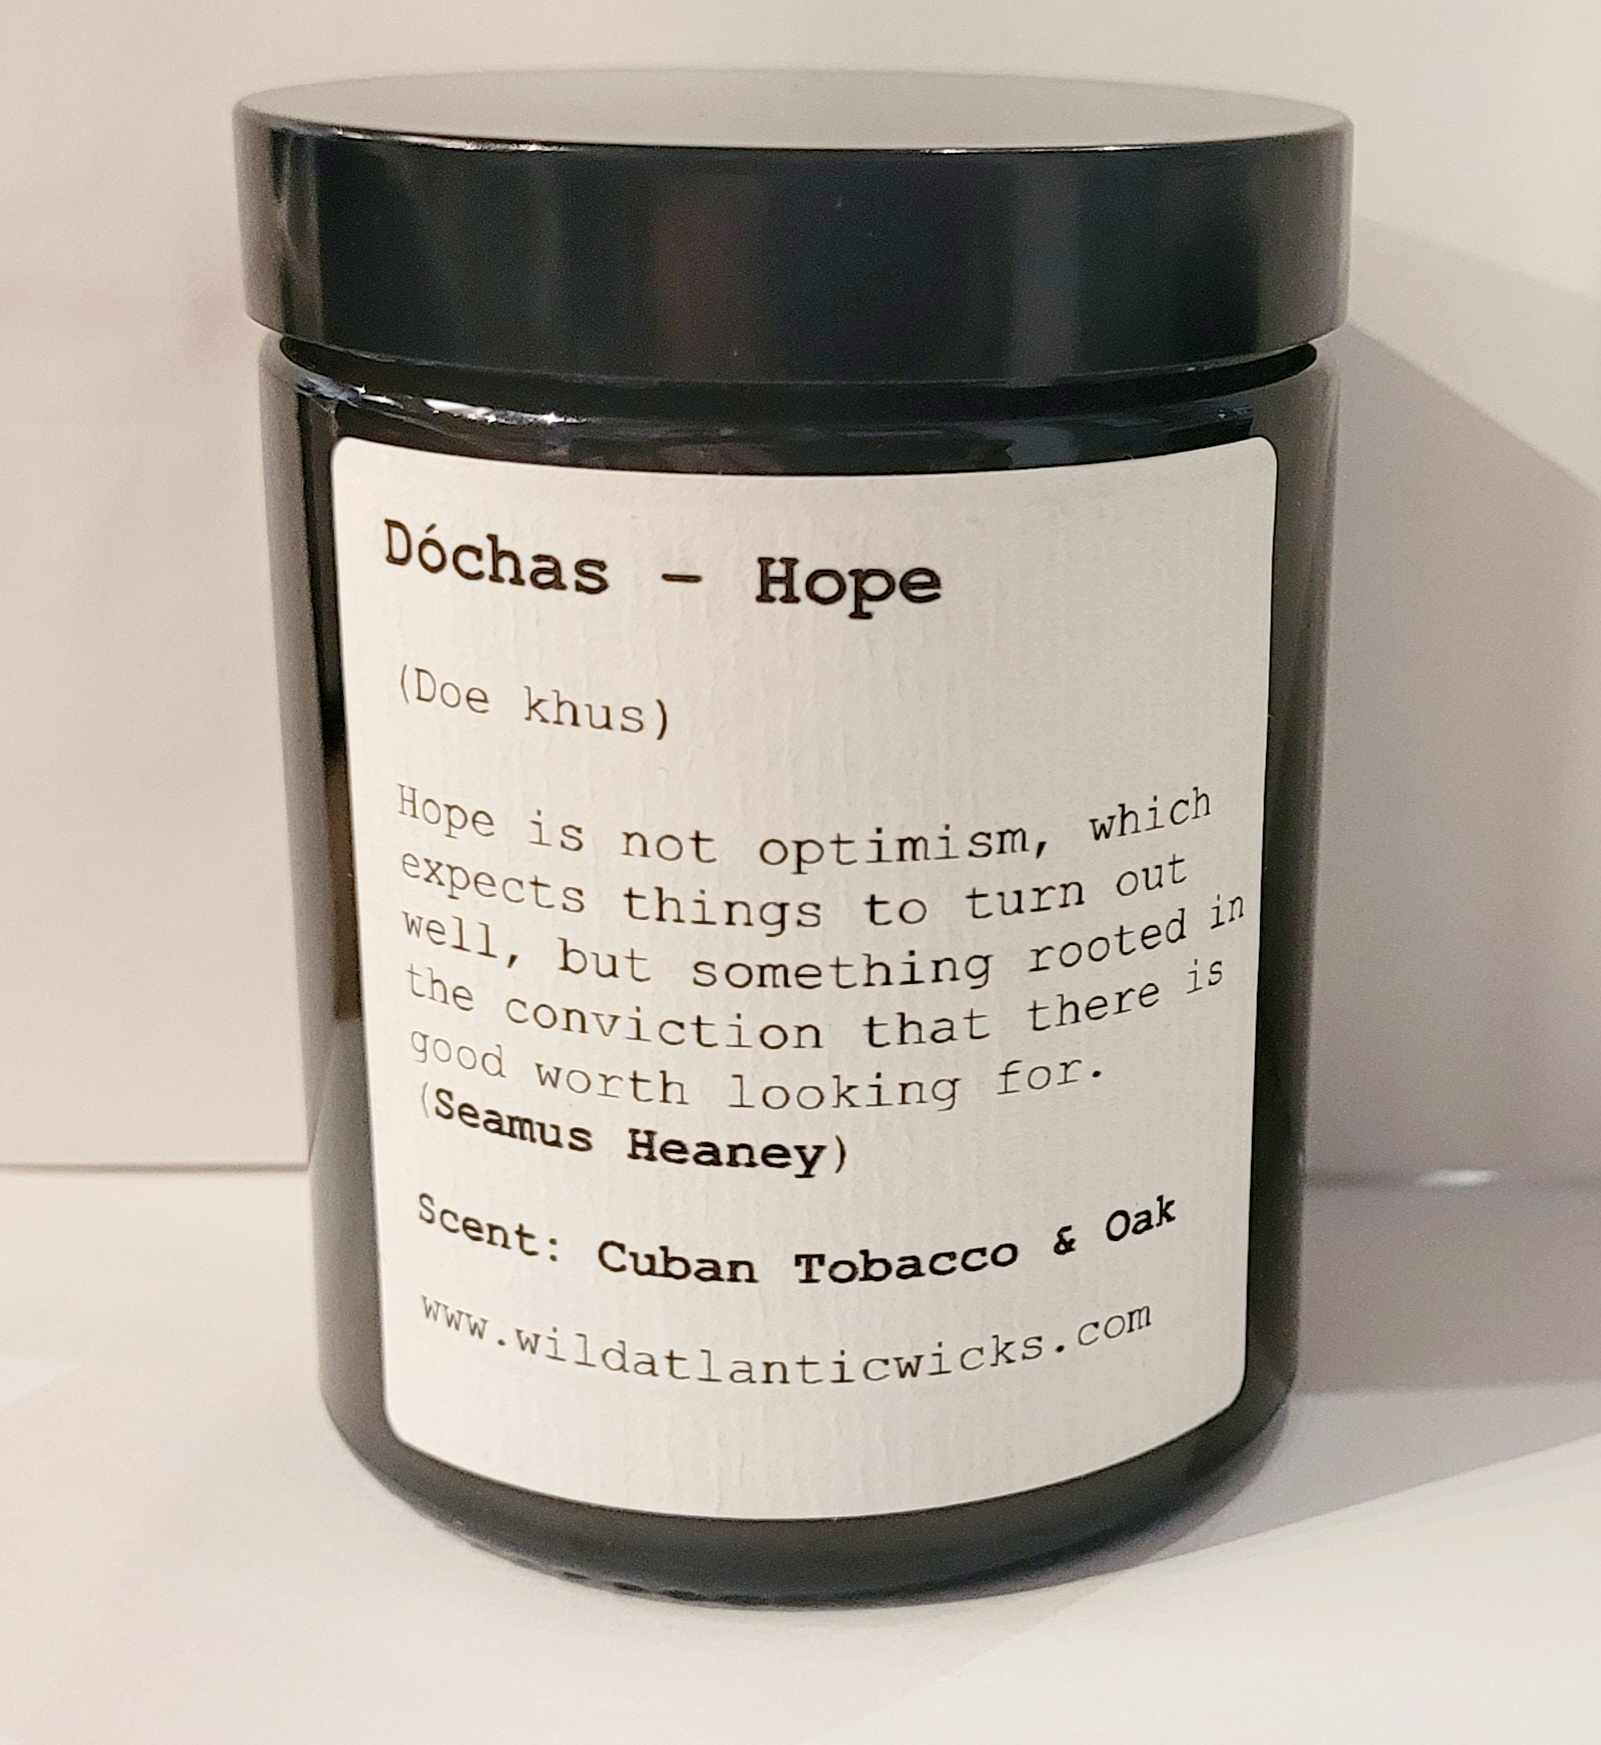 Dóchas – Hope Candle by Wild Atlantic Wicks